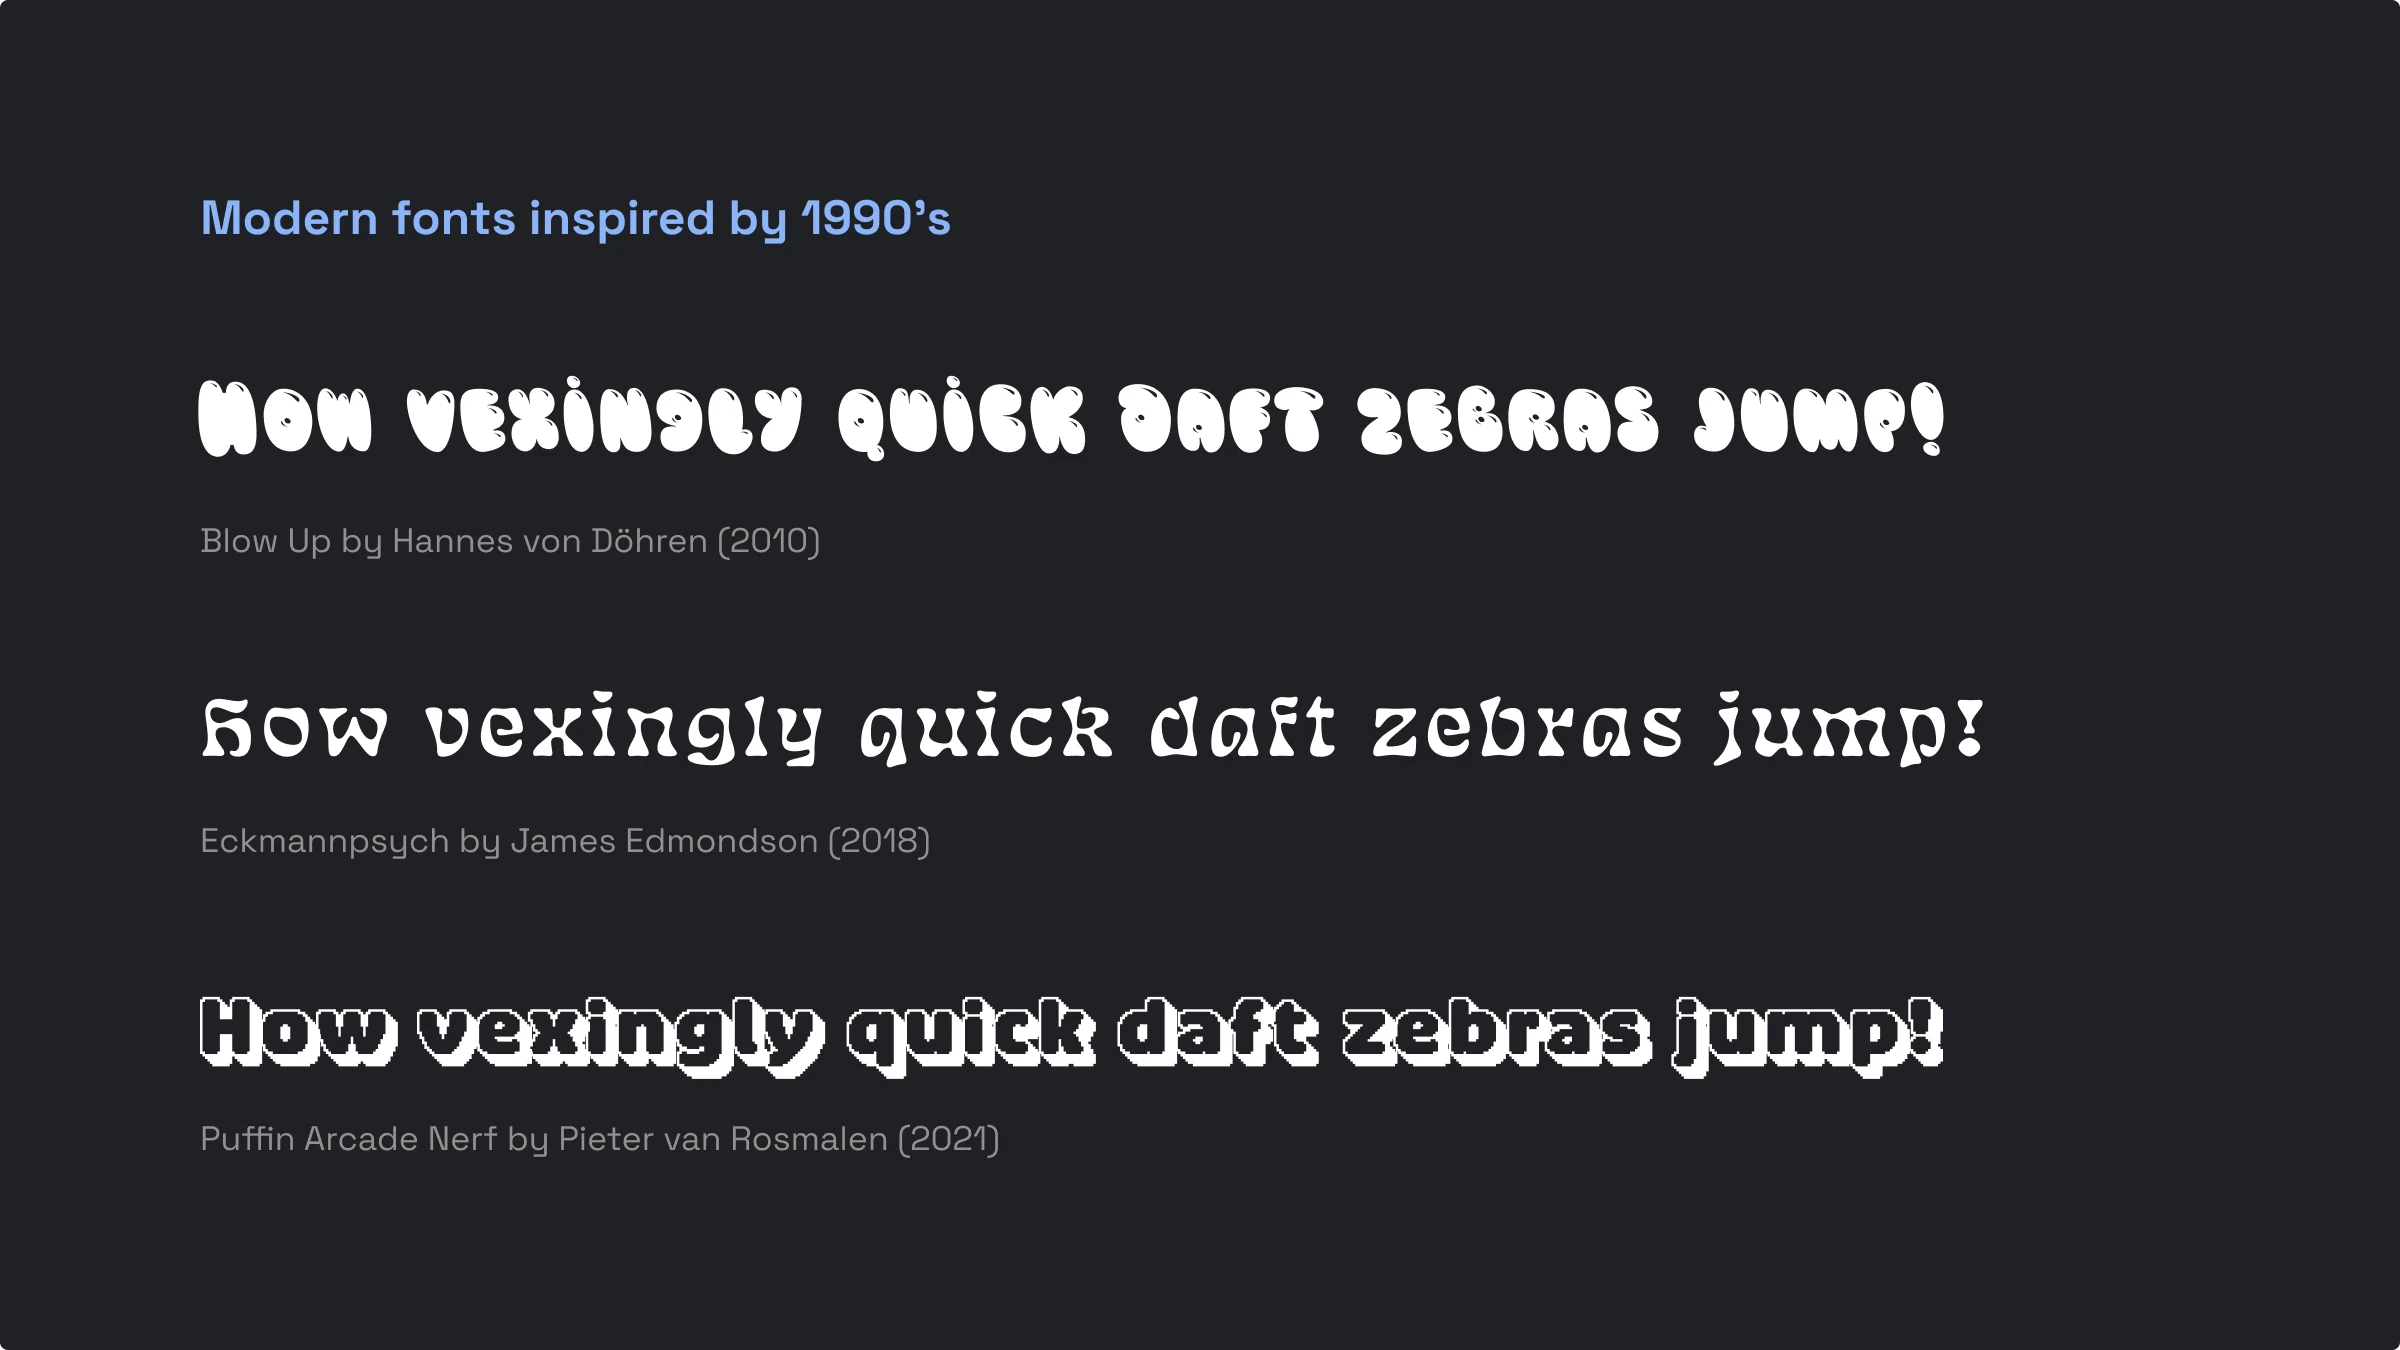 Modern fonts inspired by 1990’s